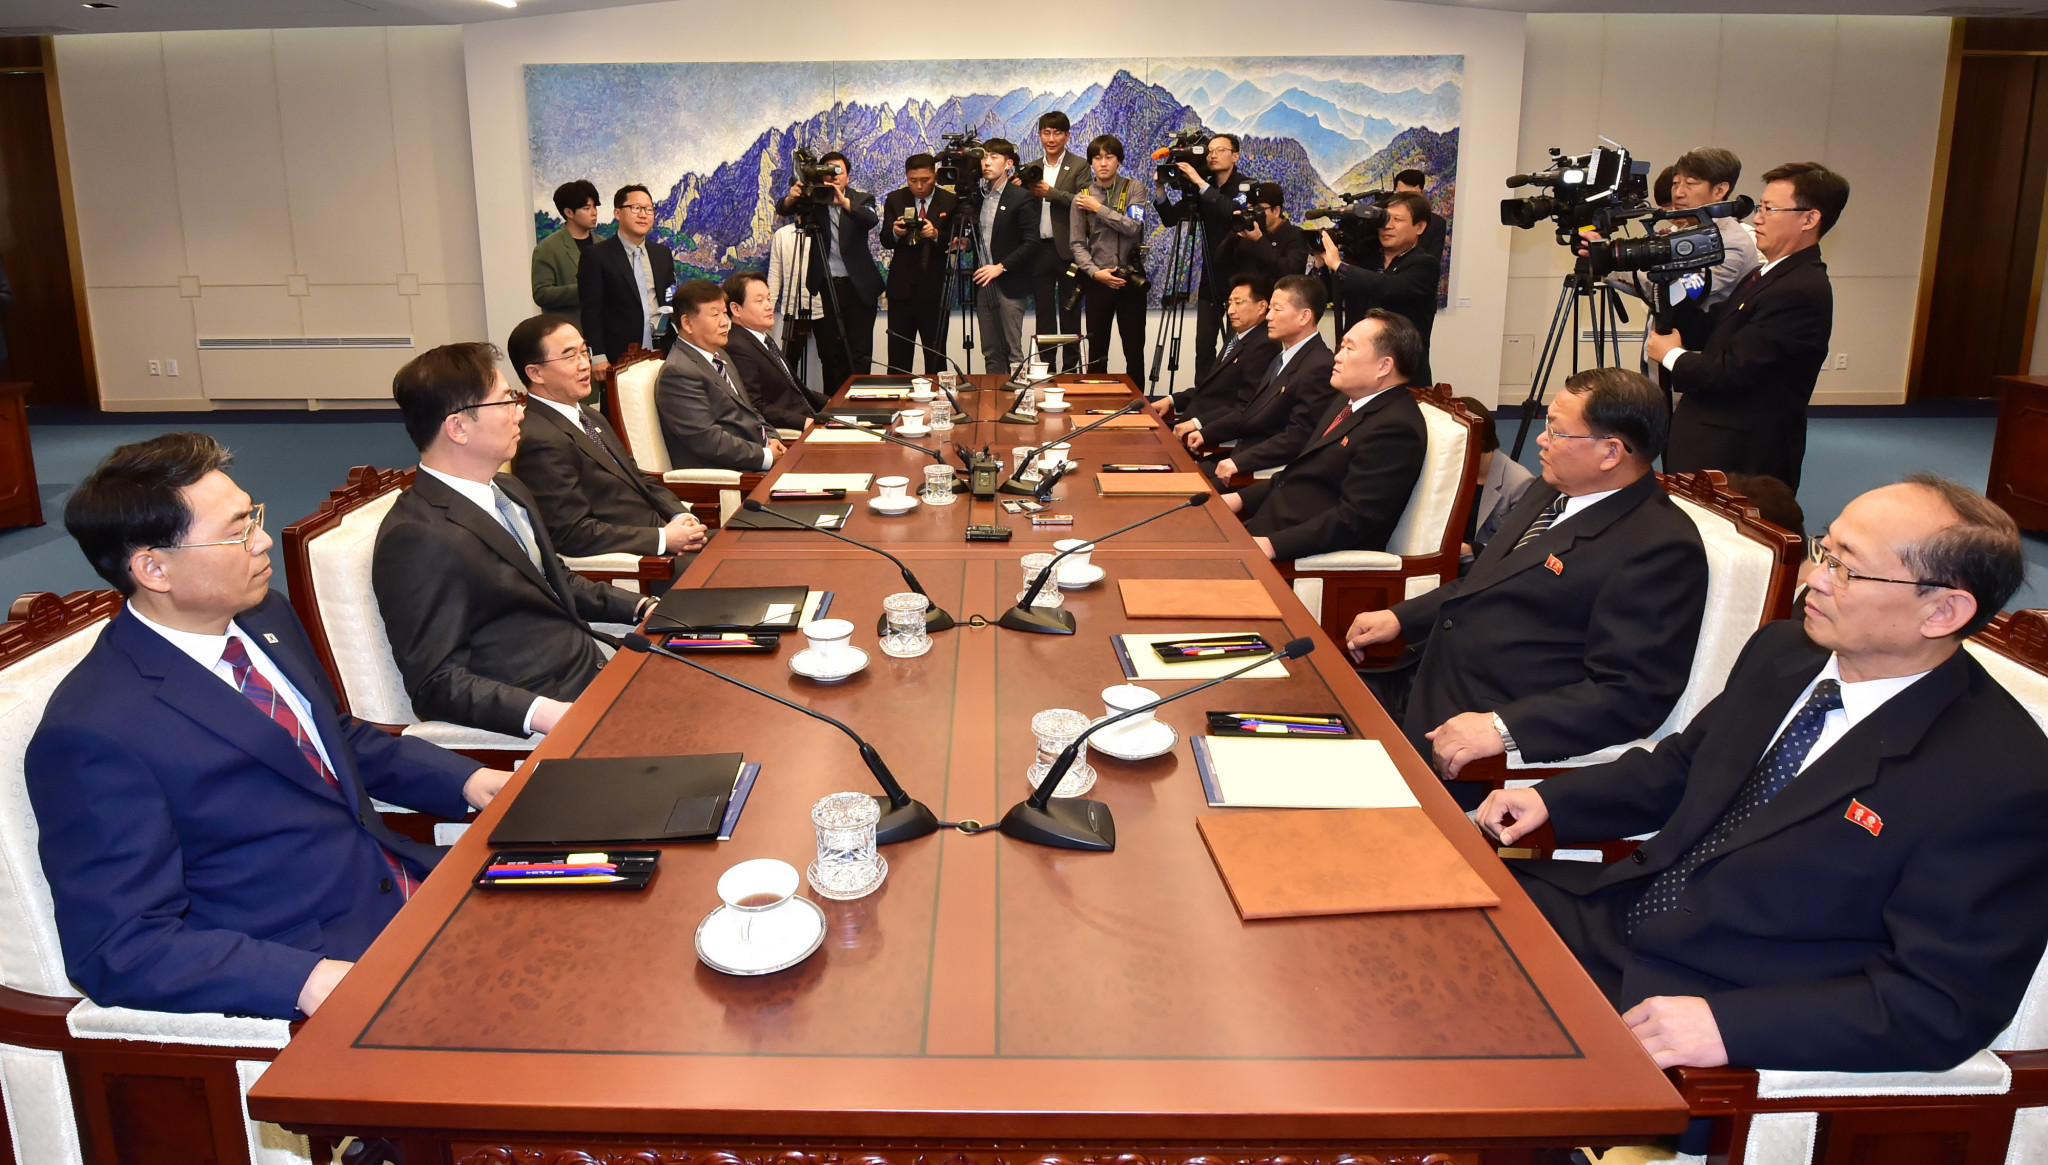 The delegations from the North and South met in the demilitarised zone to discuss the Pyongyang Joint Declaration ©Getty Images